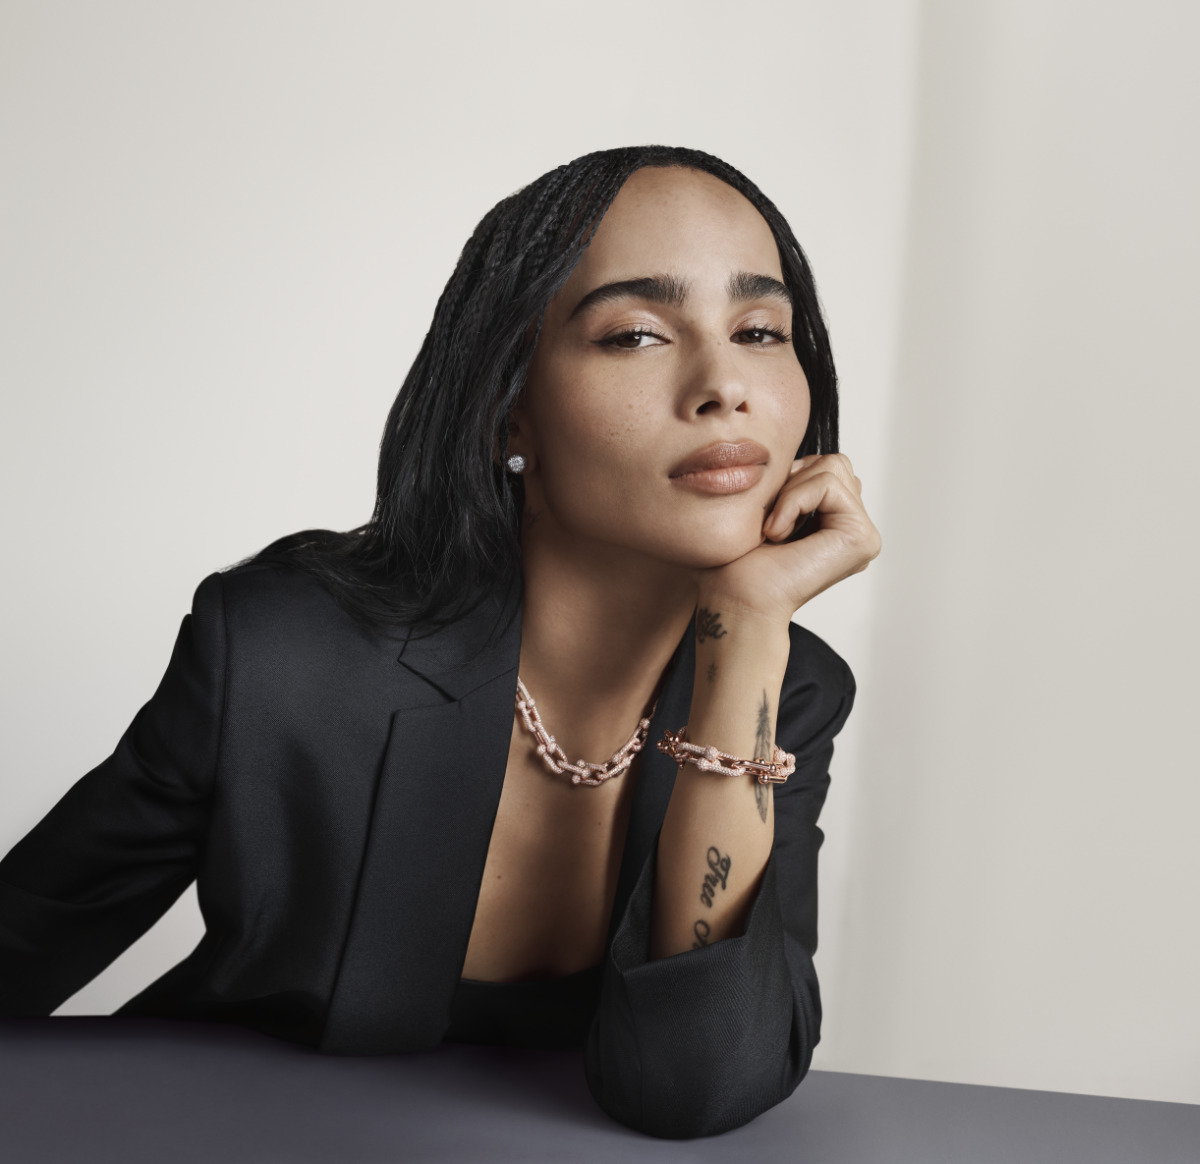 Tiffany & Co. Debuts Its New Campaign: “This Is Tiffany”